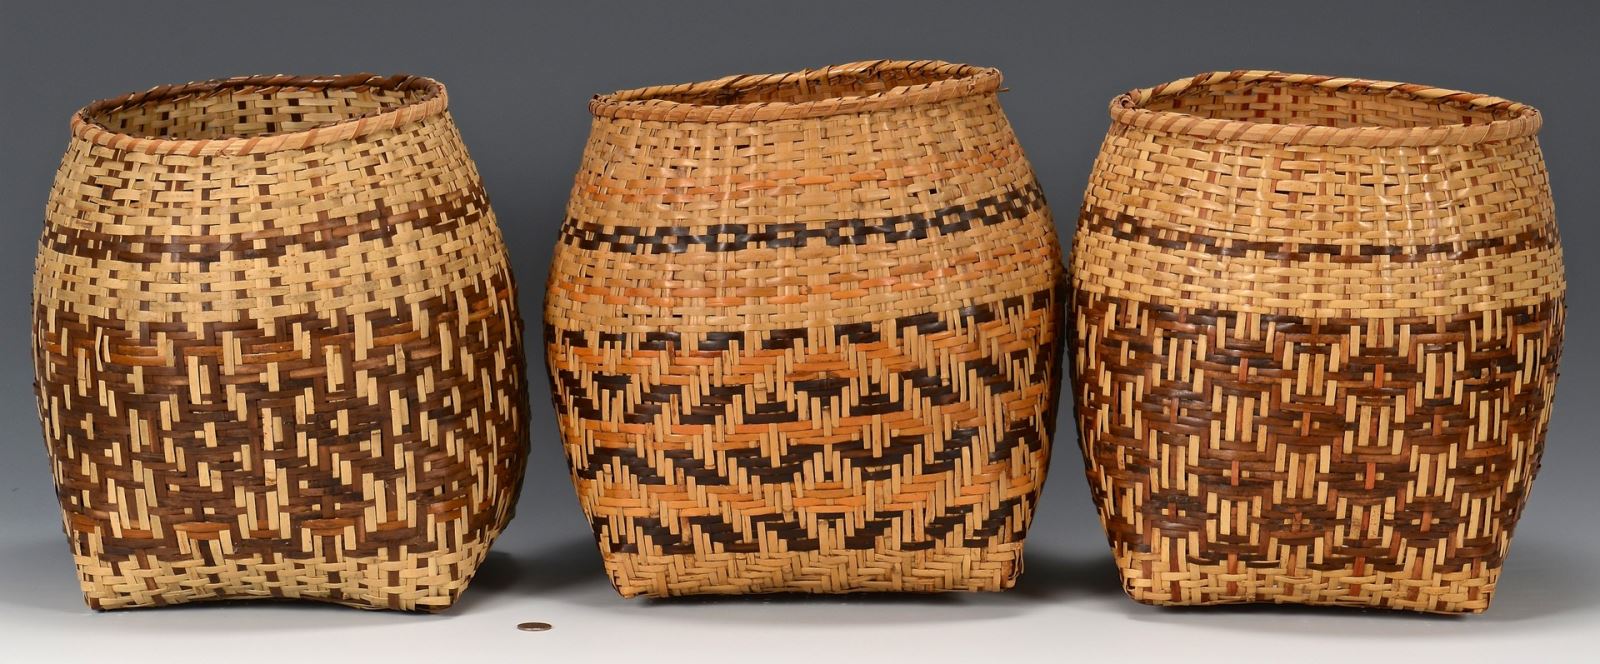 Traditional baskets of the Eastern Band of Cherokee Indians